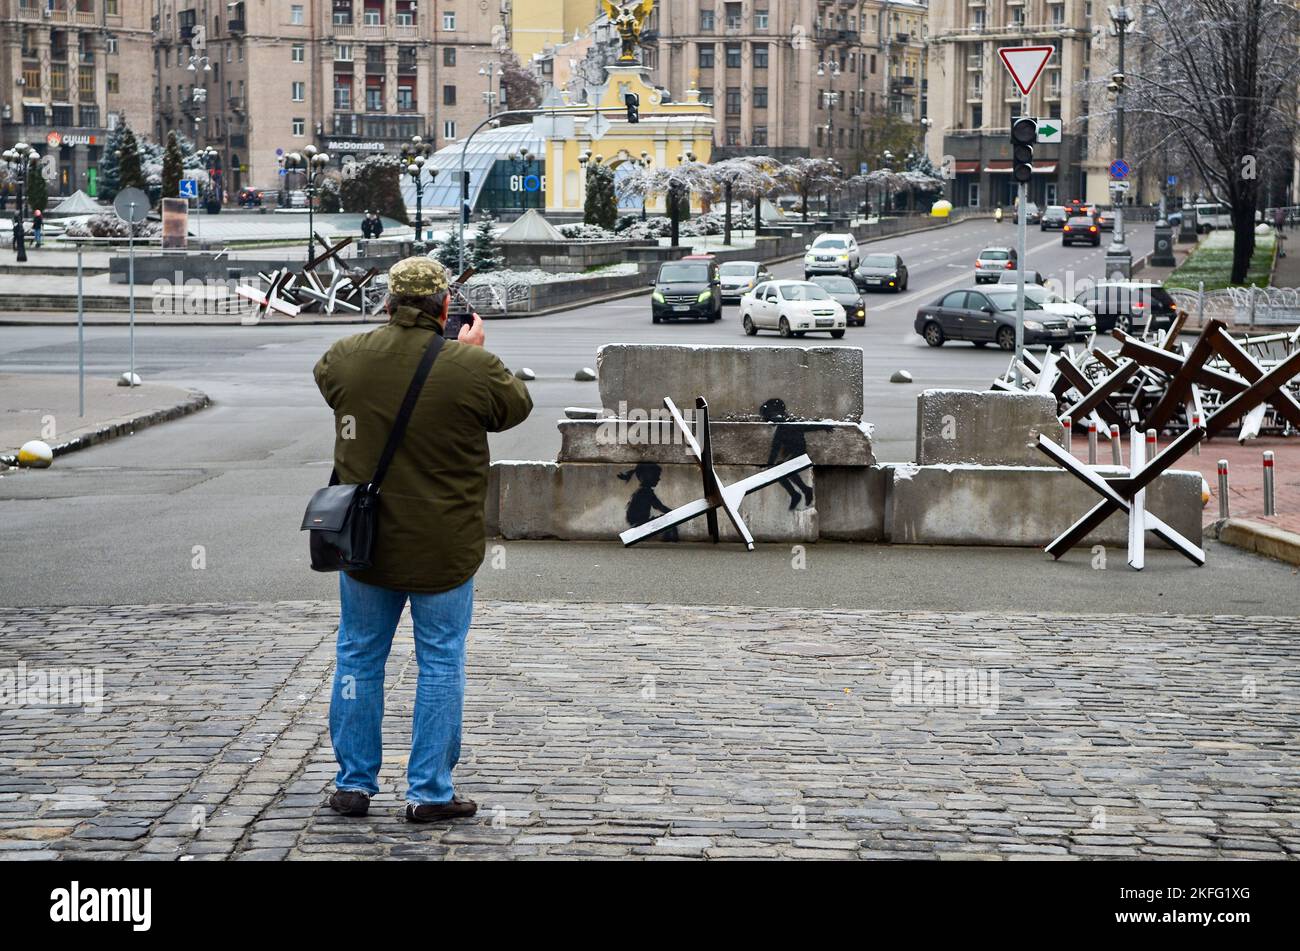 Non Exclusive: KYIV, UKRAINE - NOVEMBER 17, 2022 - A man takes a picture of the mural by England-based street artist Banksy which transforms an anti-t Stock Photo